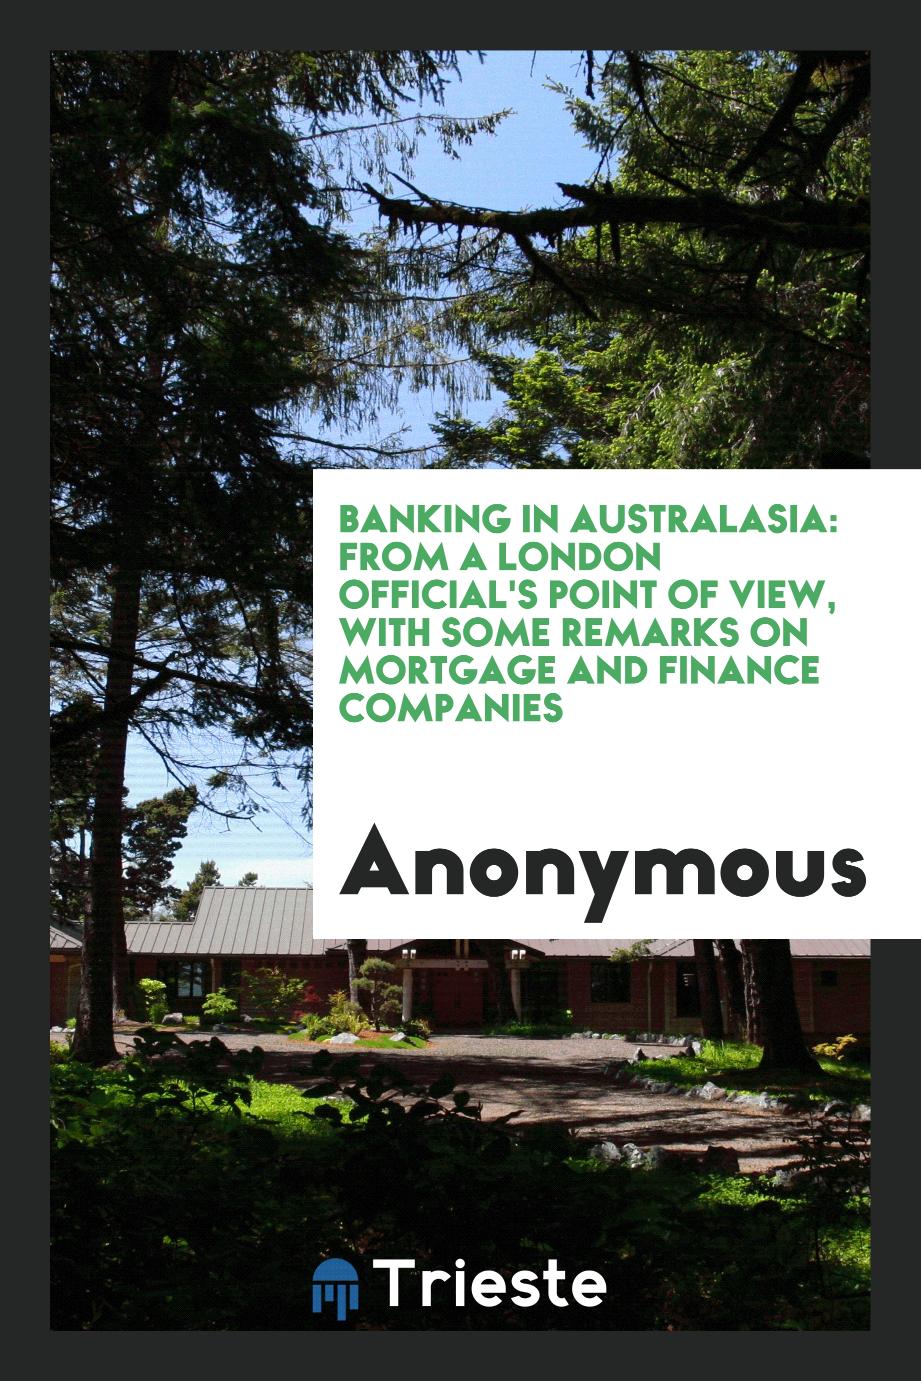 Banking in Australasia: From a London Official's Point of View, with Some Remarks on Mortgage and Finance Companies